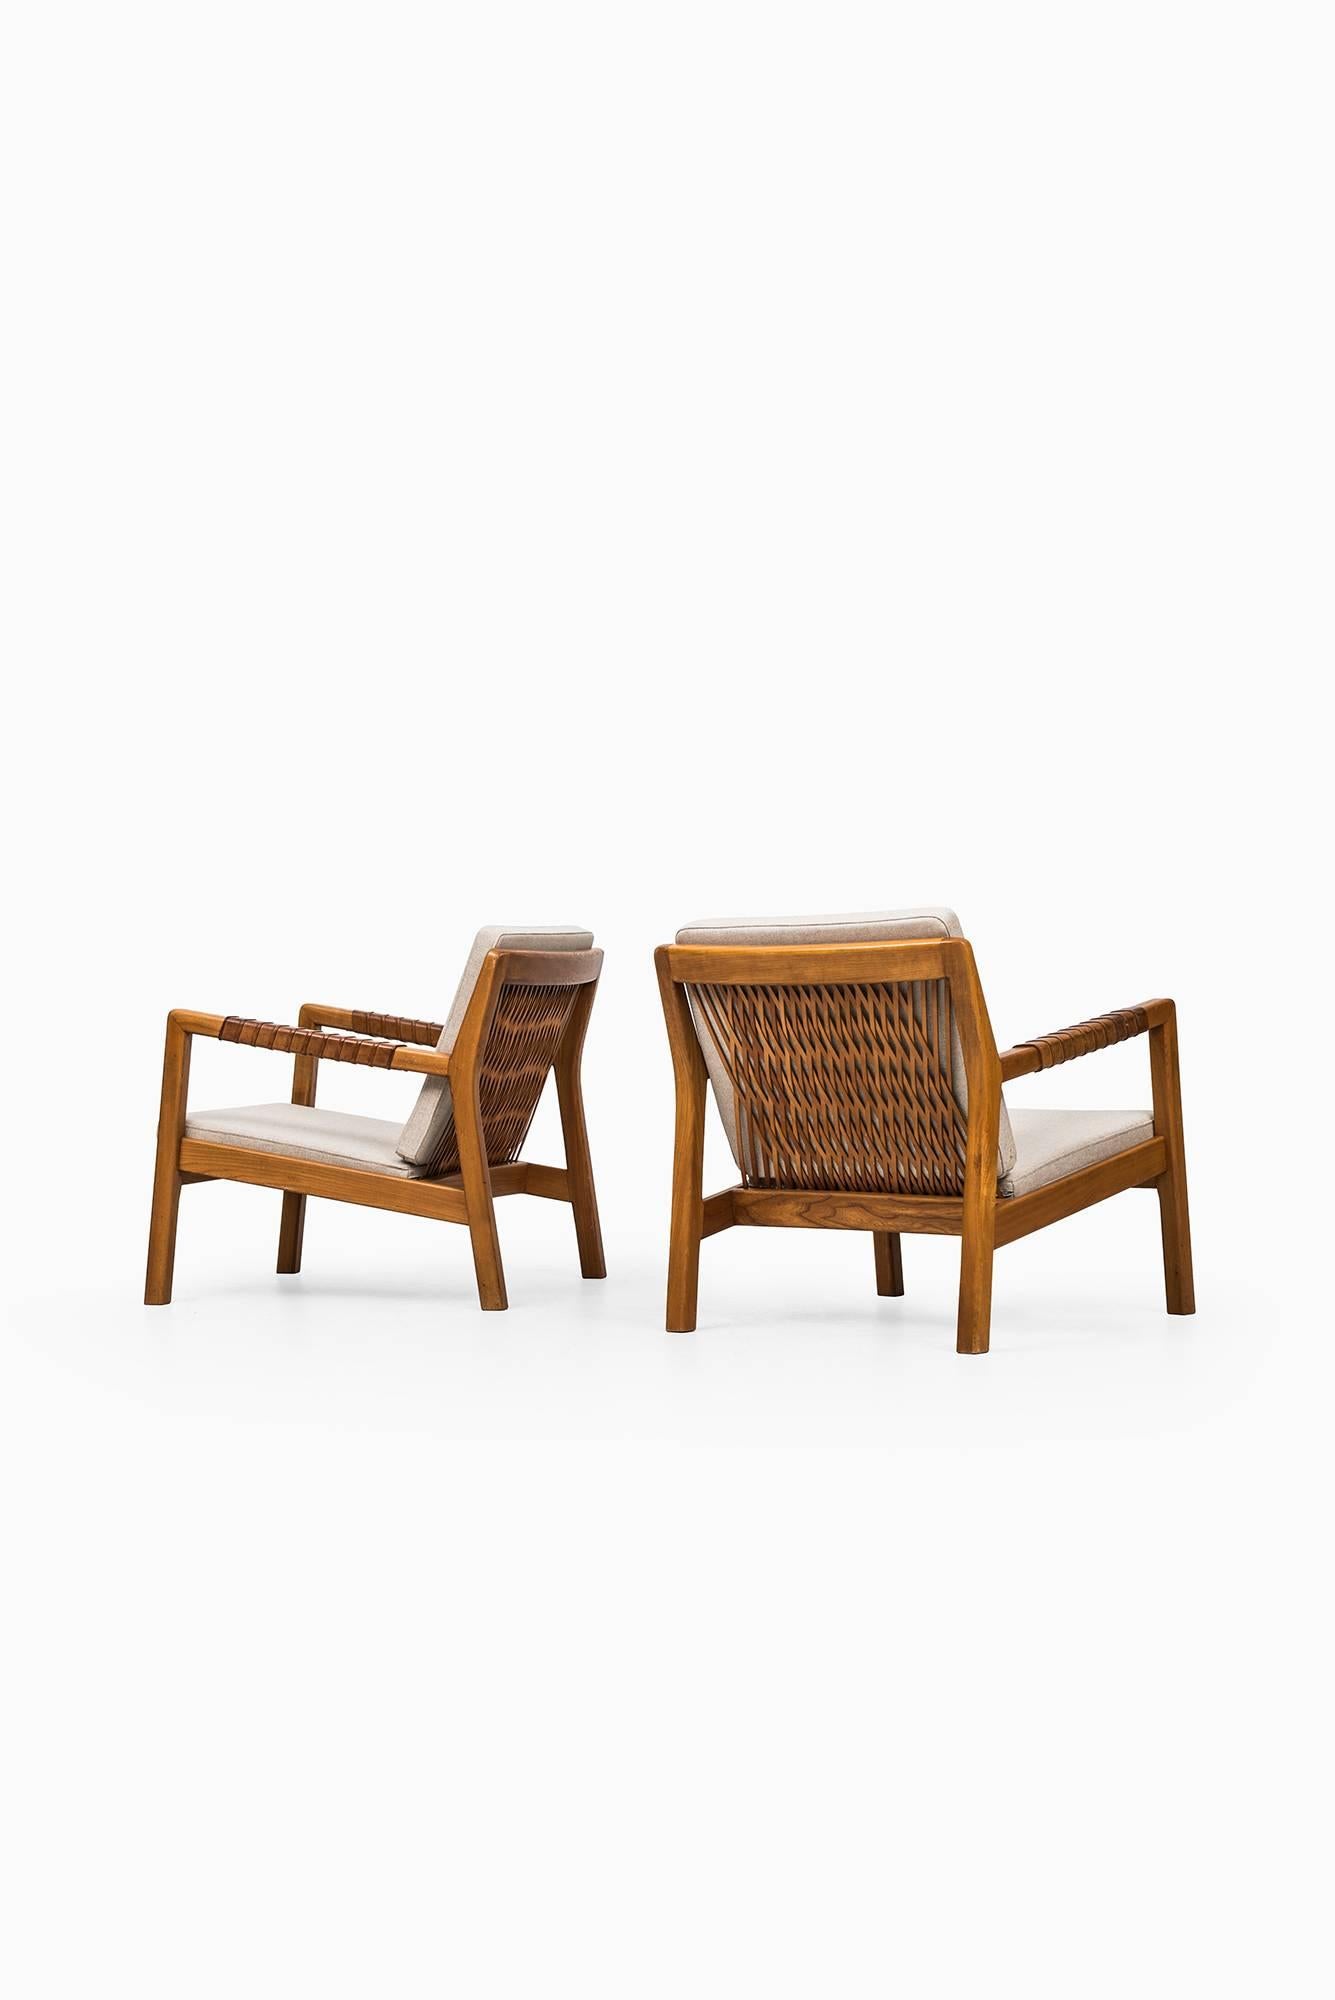 Rare pair of easy chairs model Trienna designed by Carl Gustaf Hiort af Ornäs. Produced in Finland.